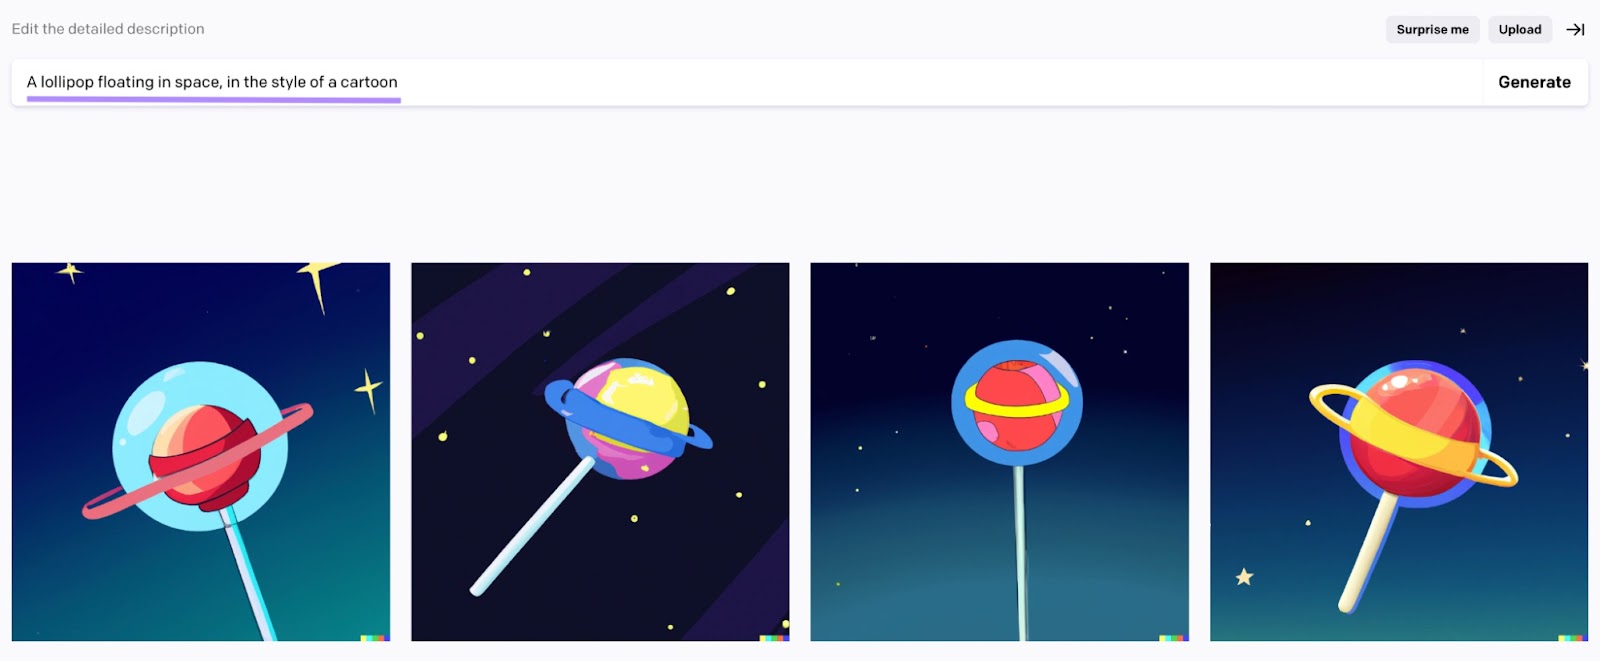 DALL-E 2 created images for “A lollipop floating in space, in the style of a cartoon"